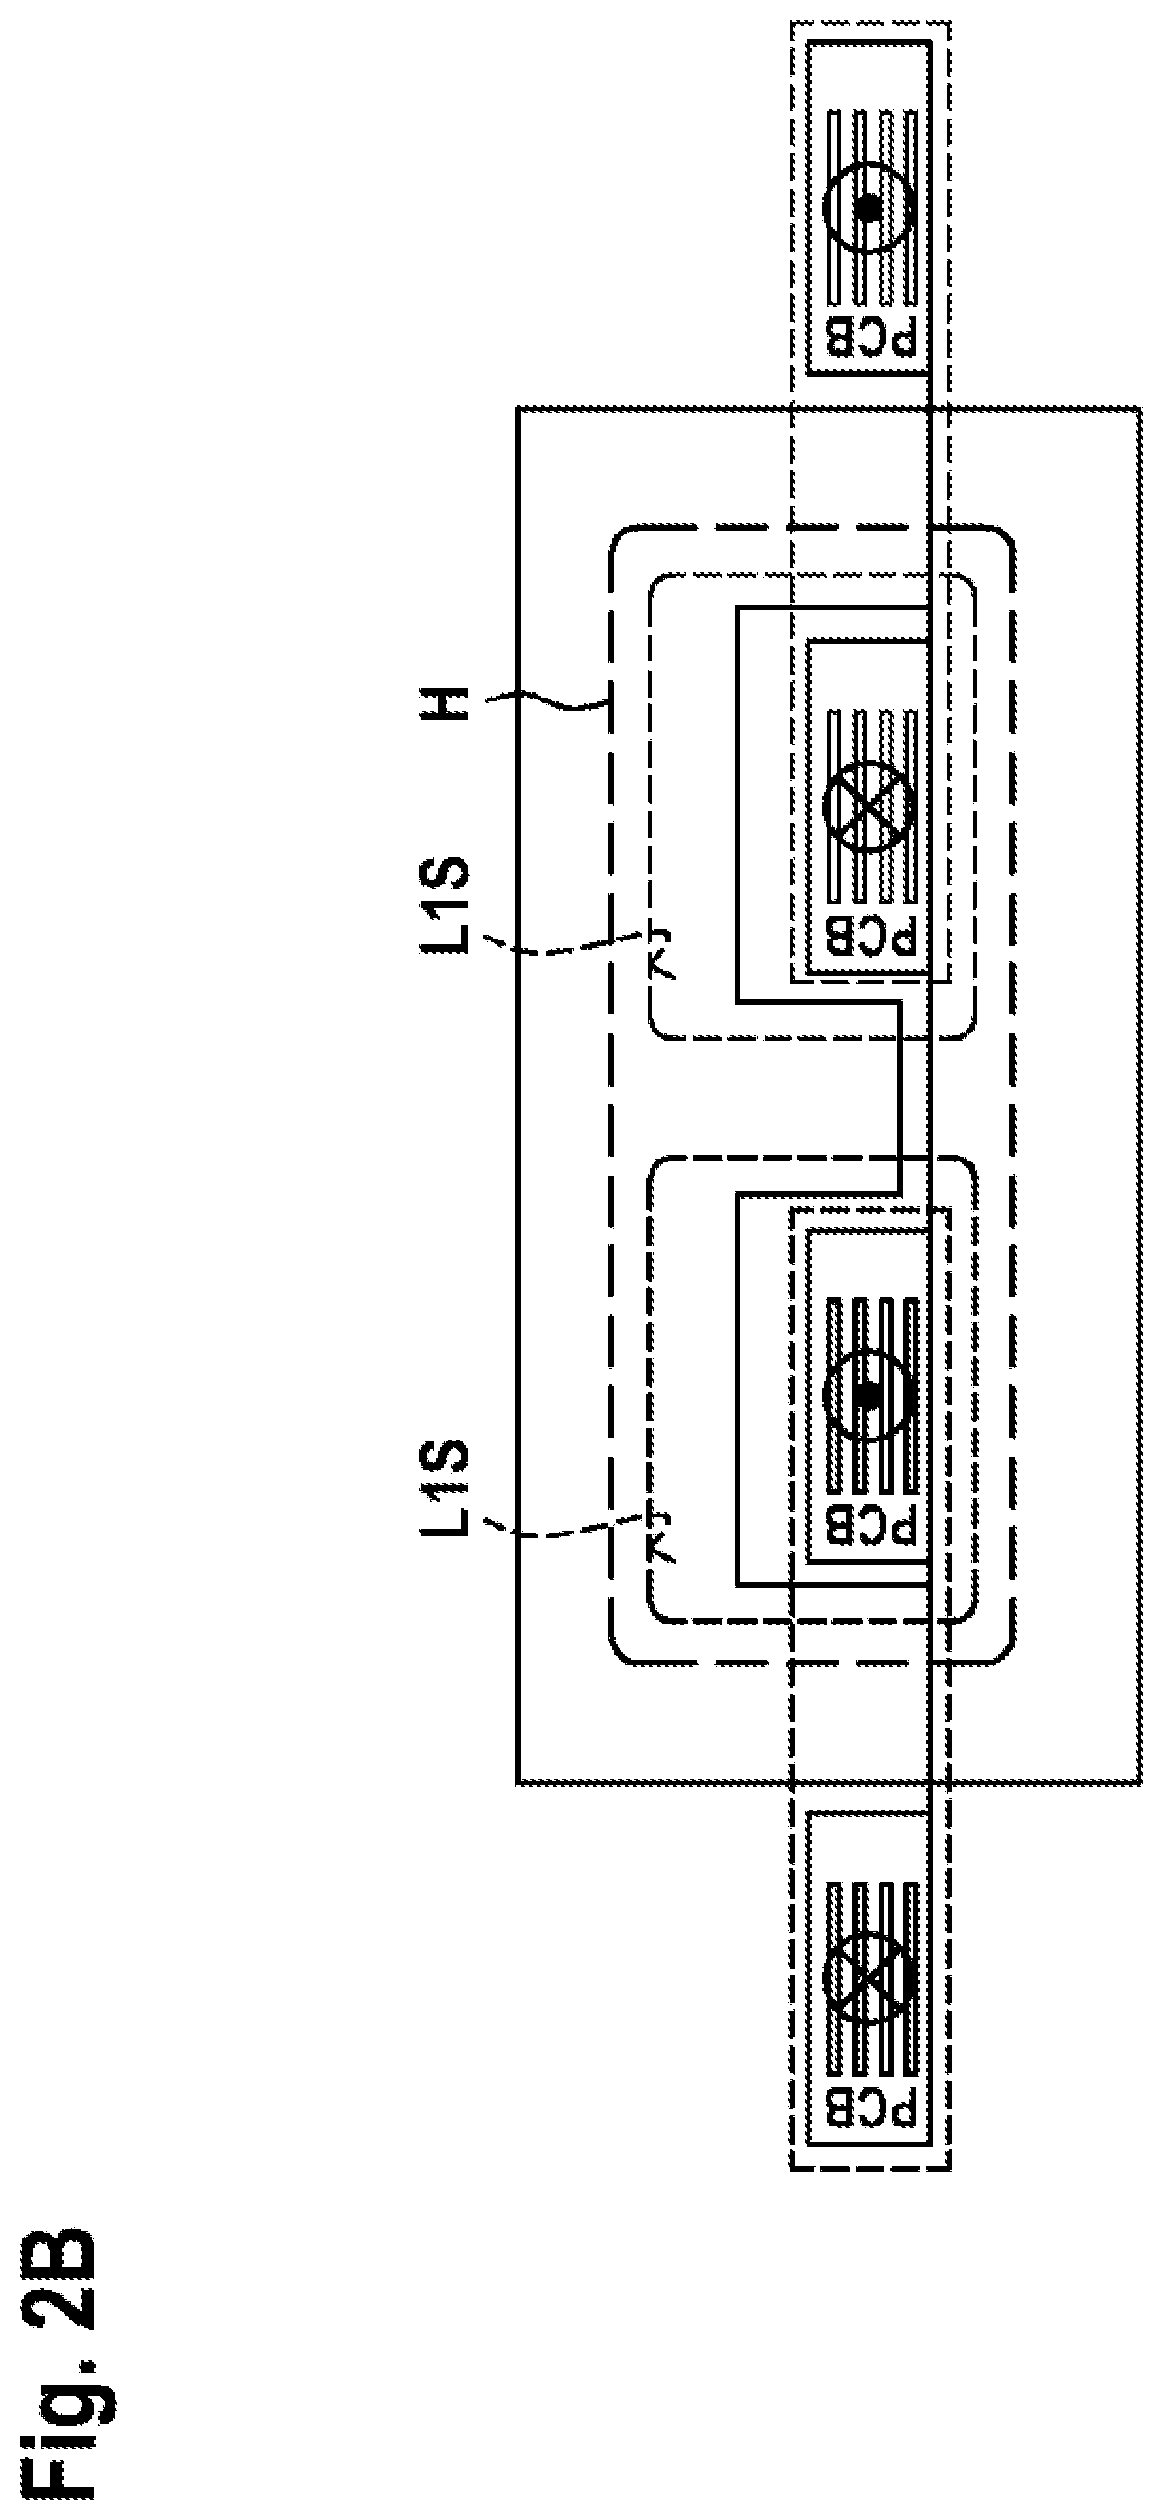 Common-mode/differential-mode throttle for an electrically driveable motor vehicle